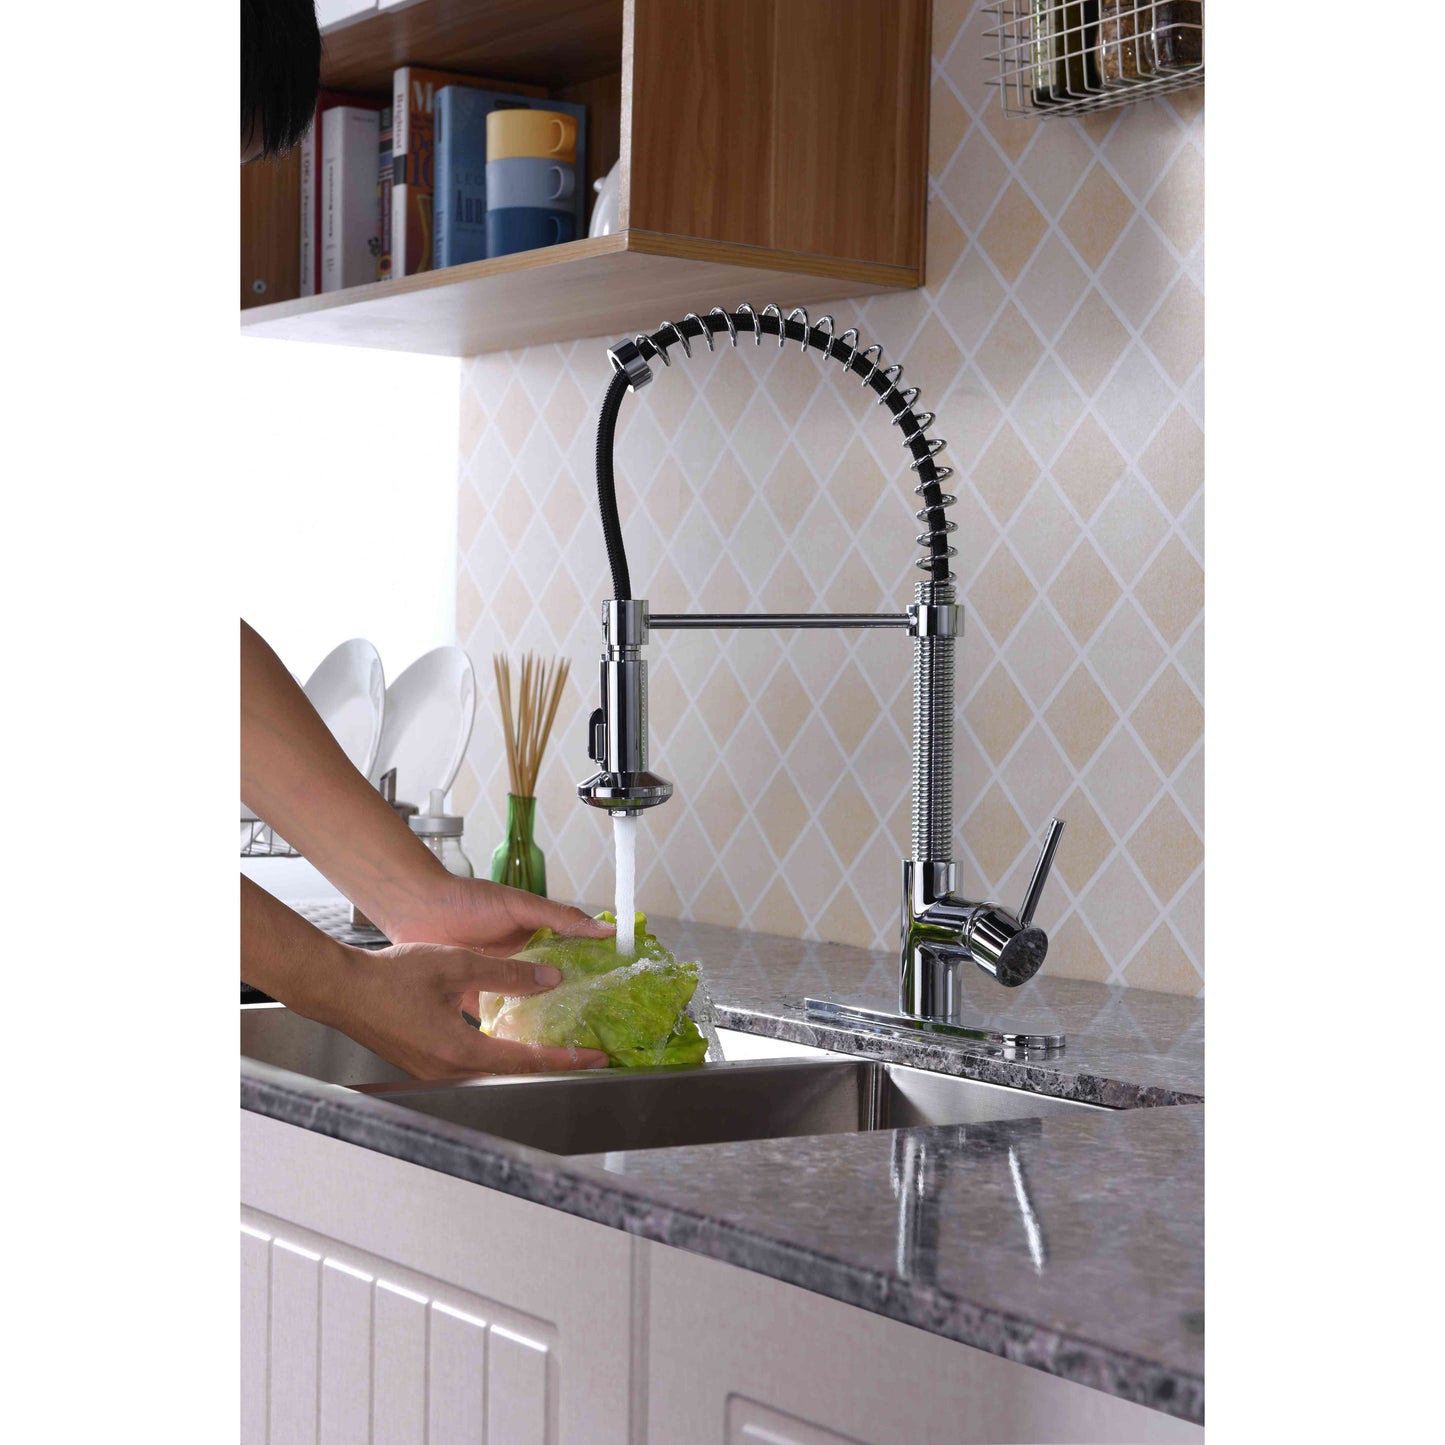 ANZZI Step Series Single Hole Polished Chrome Kitchen Faucet With Euro-Grip Pull Down Sprayer